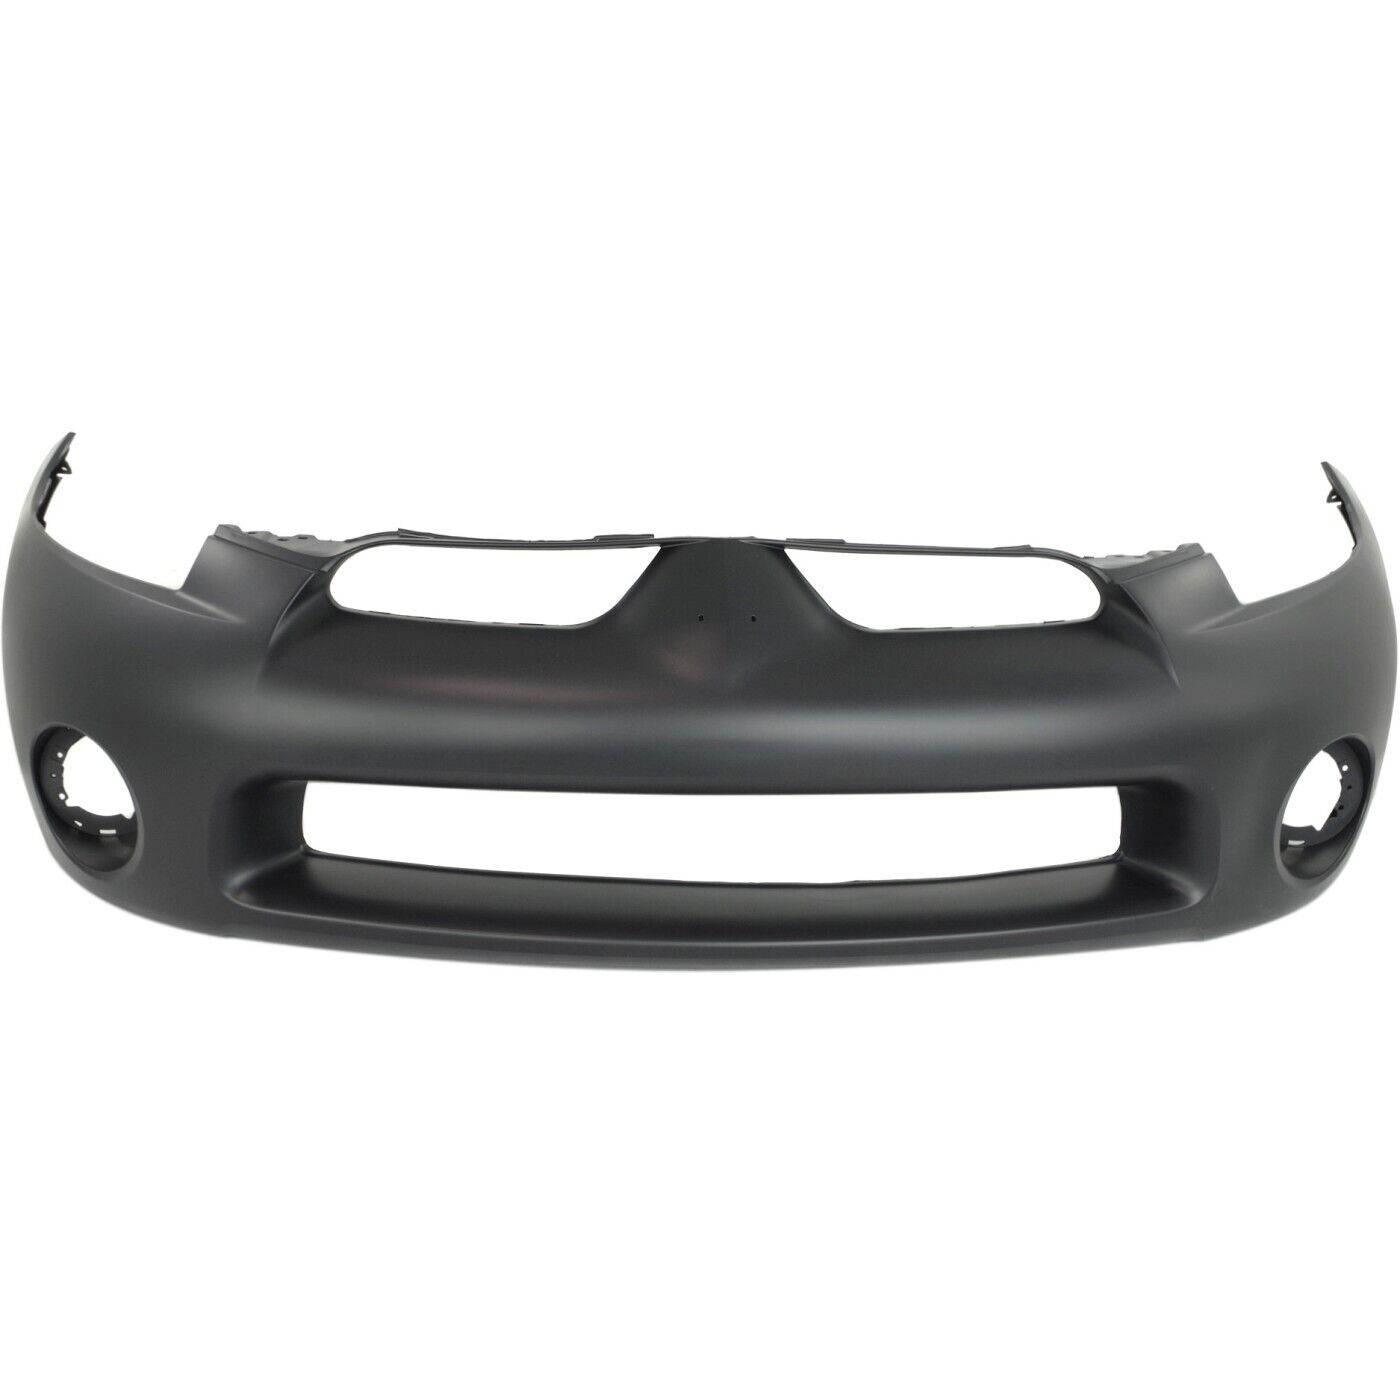 NEW Primed - Front Bumper Cover Replacement for 2006-2008 Mitsubishi Eclipse